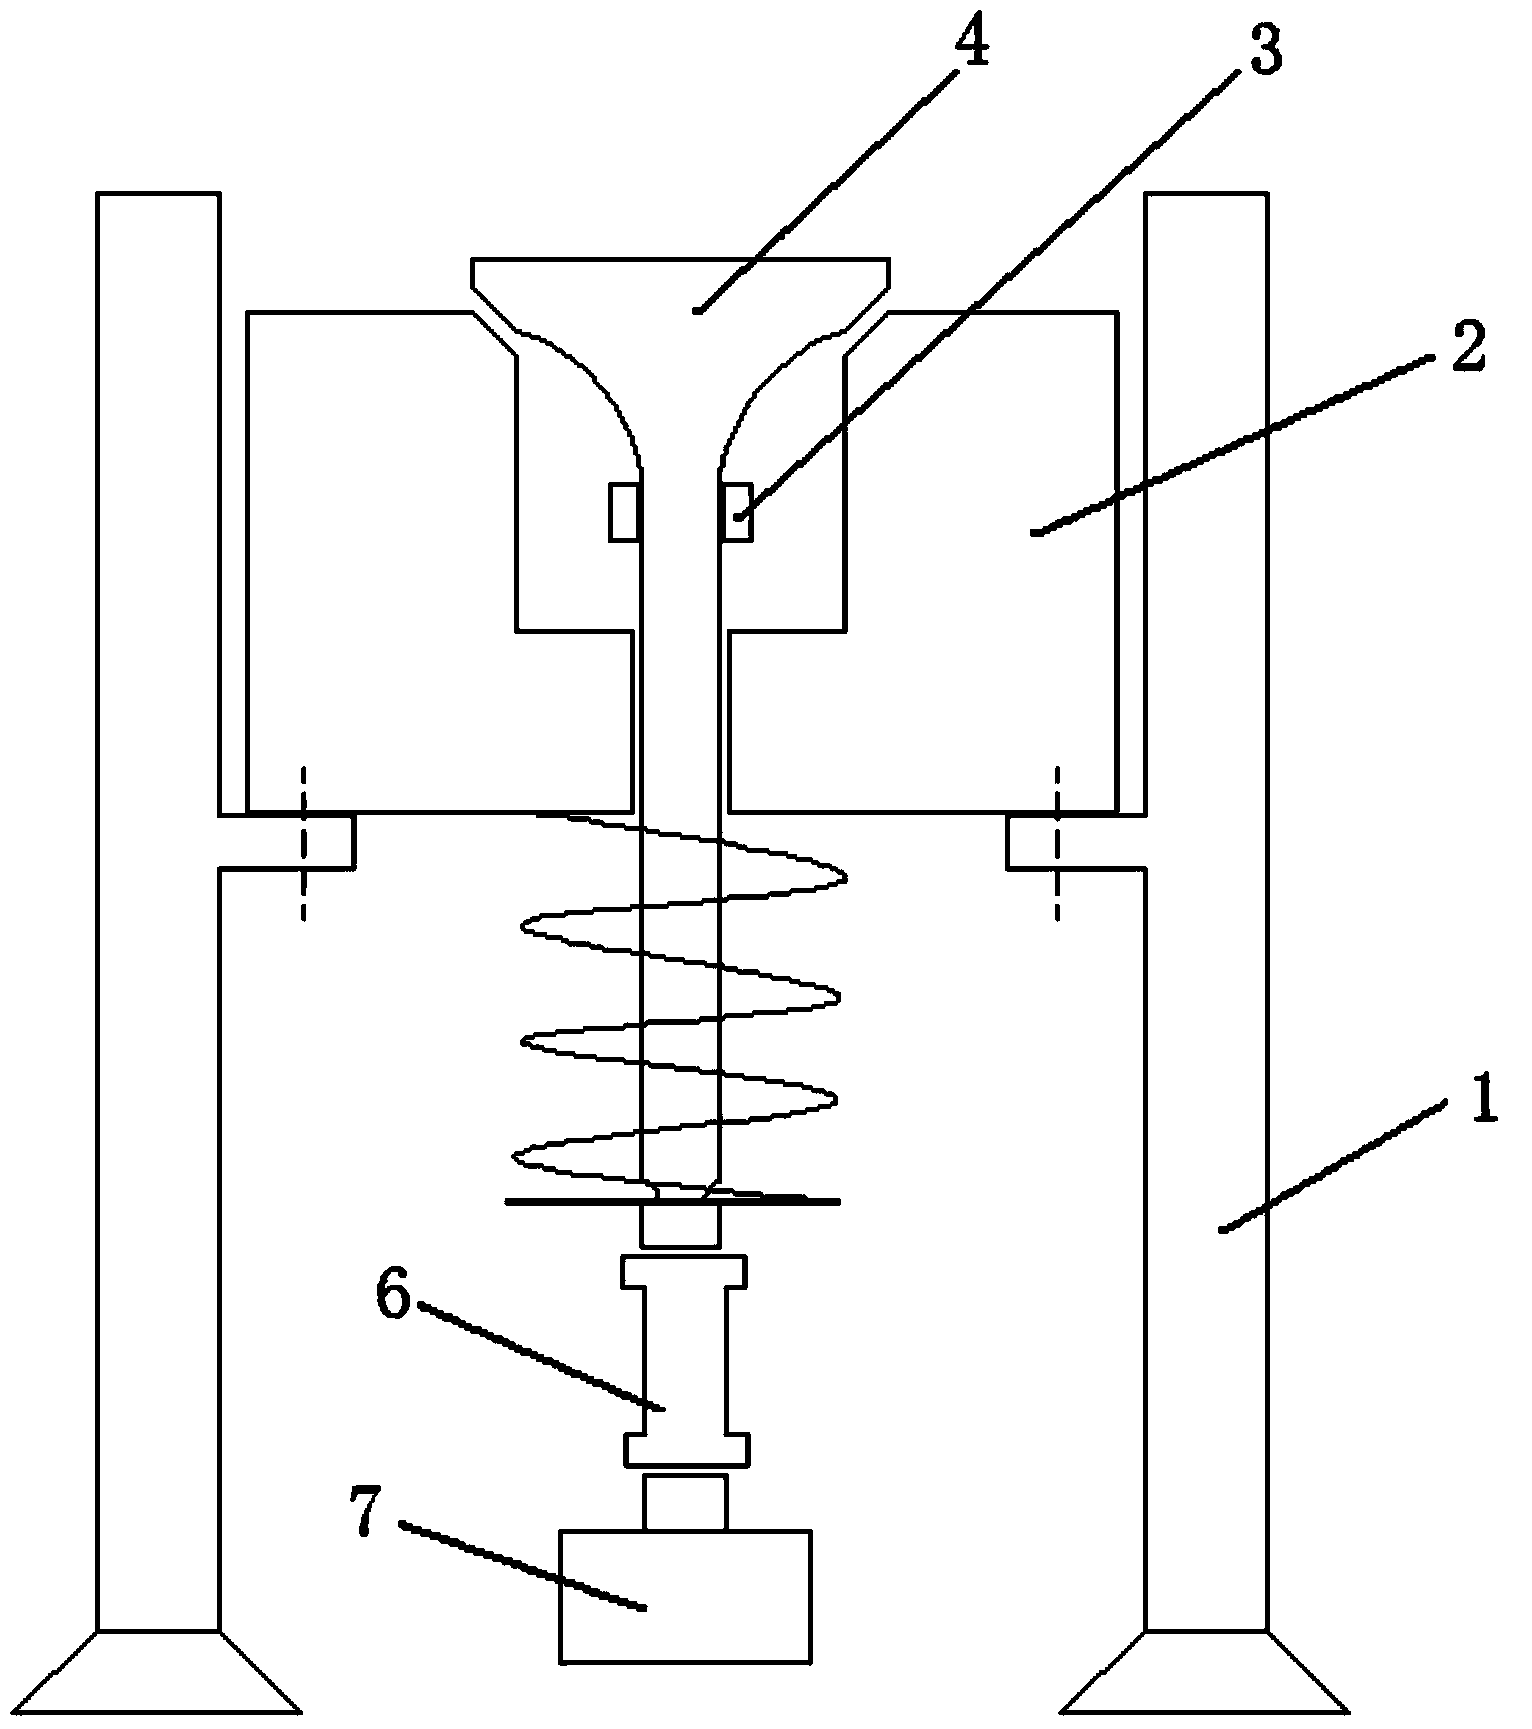 Device and method for measuring engine valve landing radial deflection